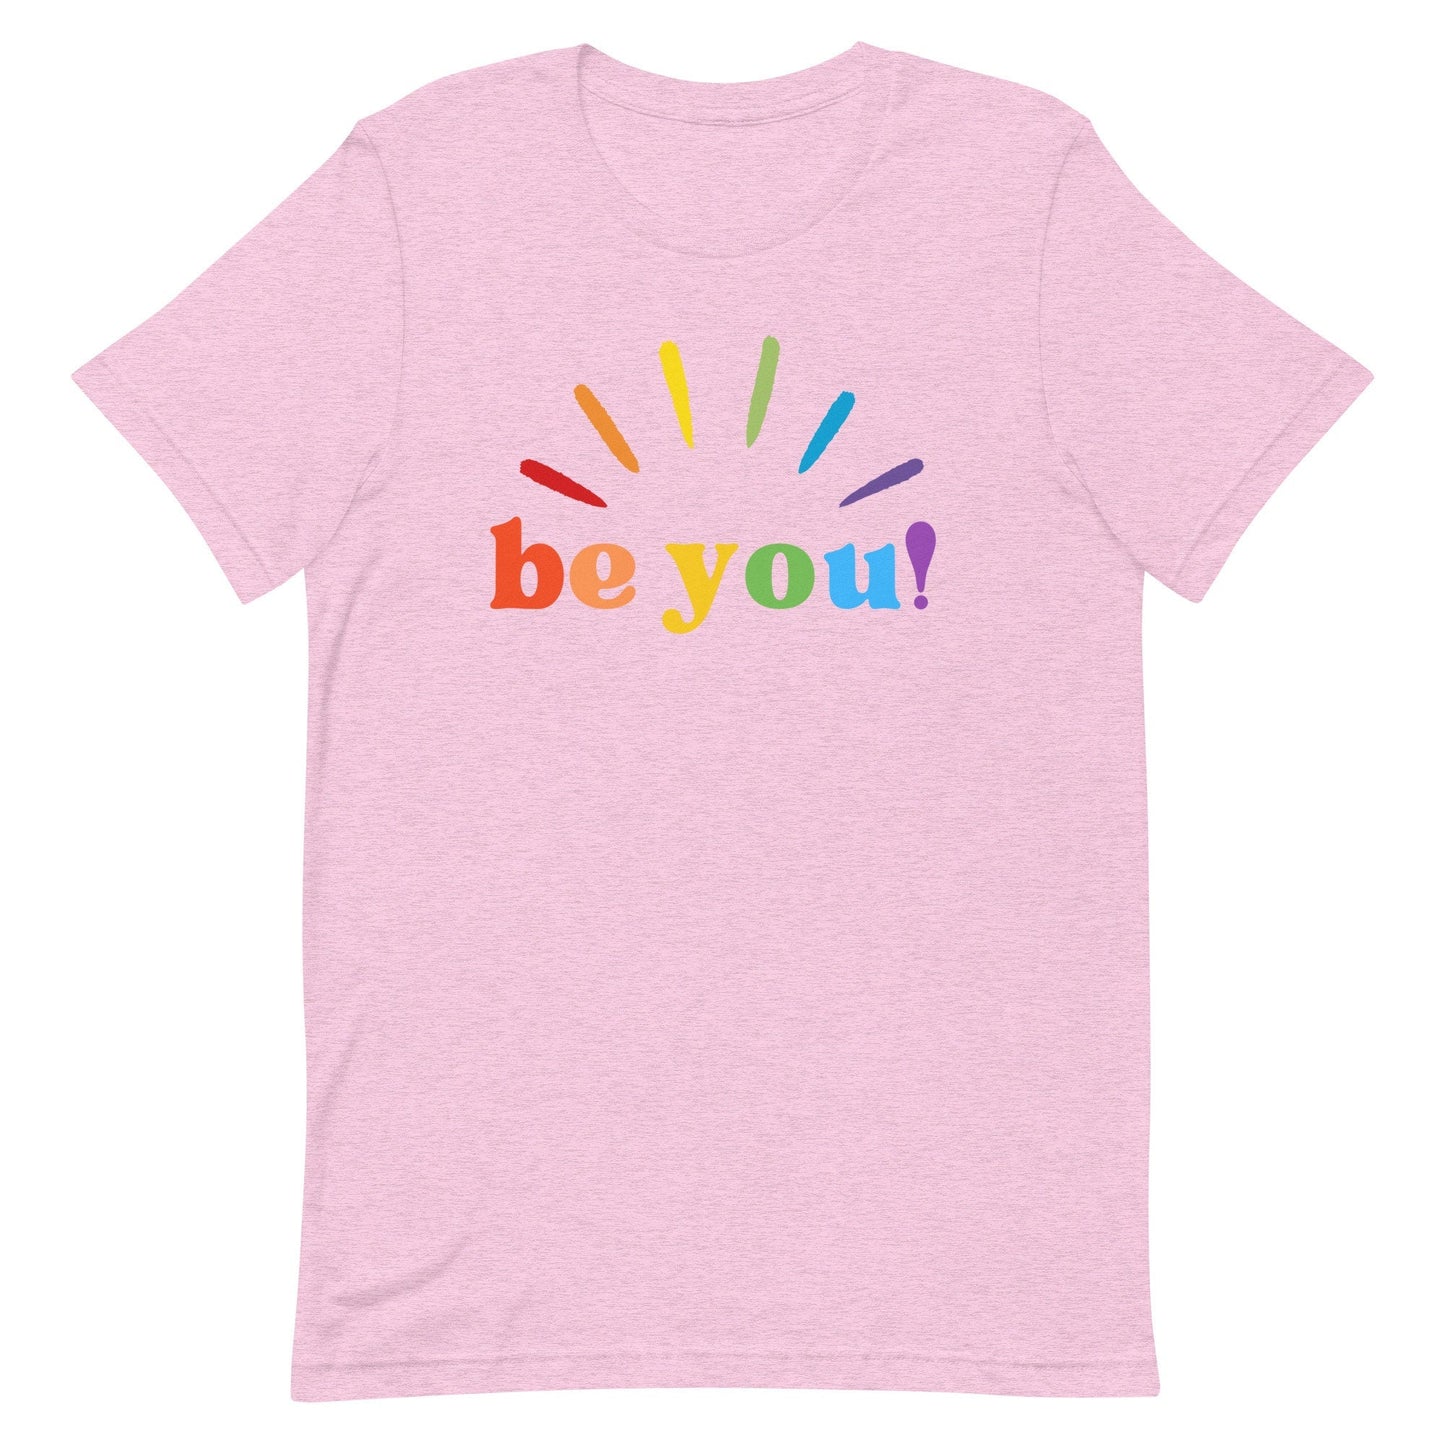 Be You Pride Rainbow Graphic Tees Funny Letter Print LGBT Equality Unisex t-shirt - ActivistChic